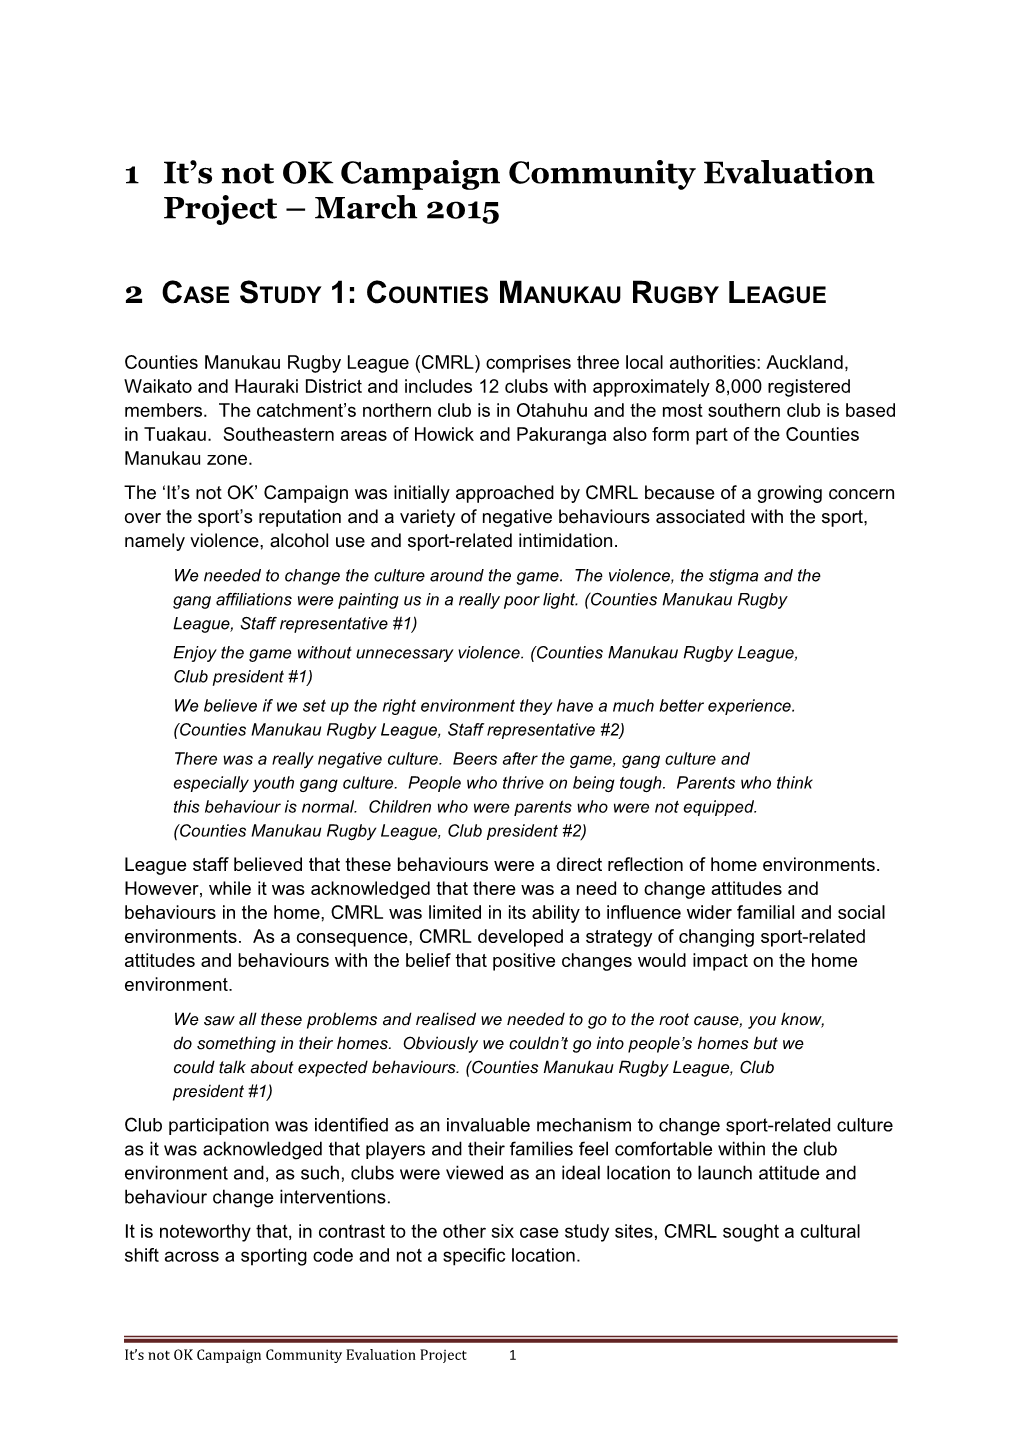 Case Study 1: Counties Manukau Rugby League